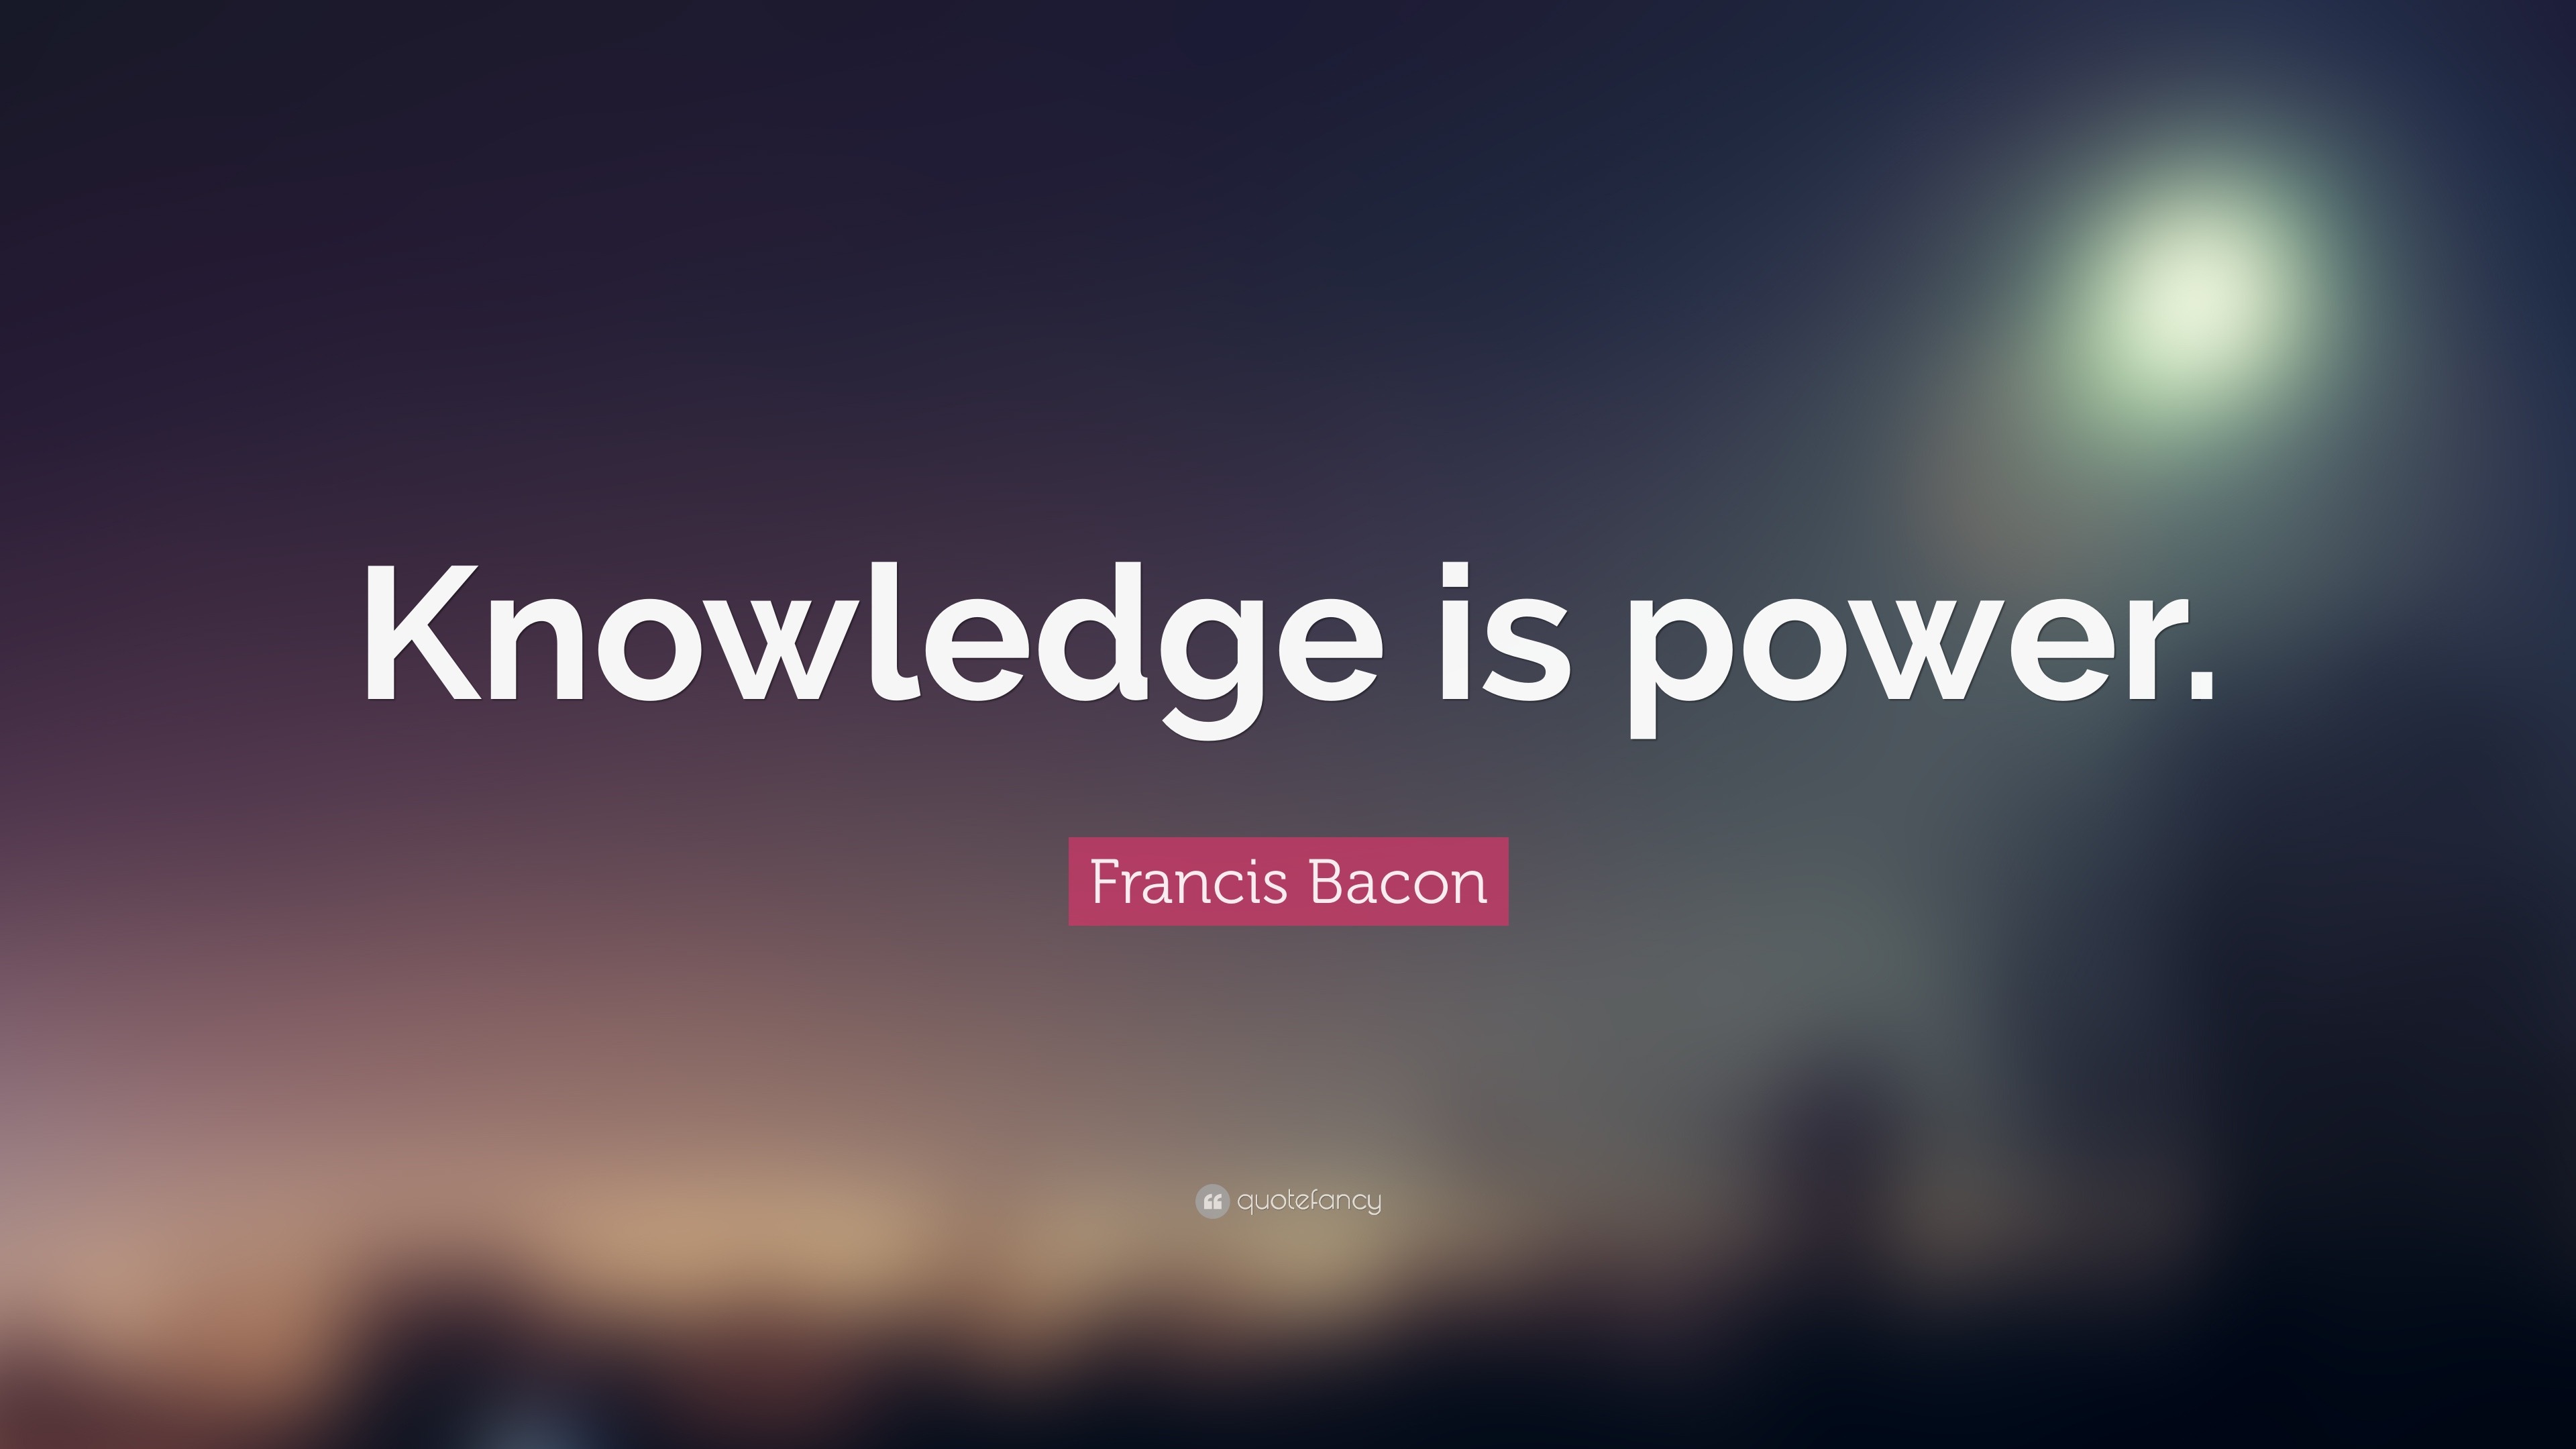 Francis Bacon Quote: “Knowledge is power.” (27 wallpapers) - Quotefancy